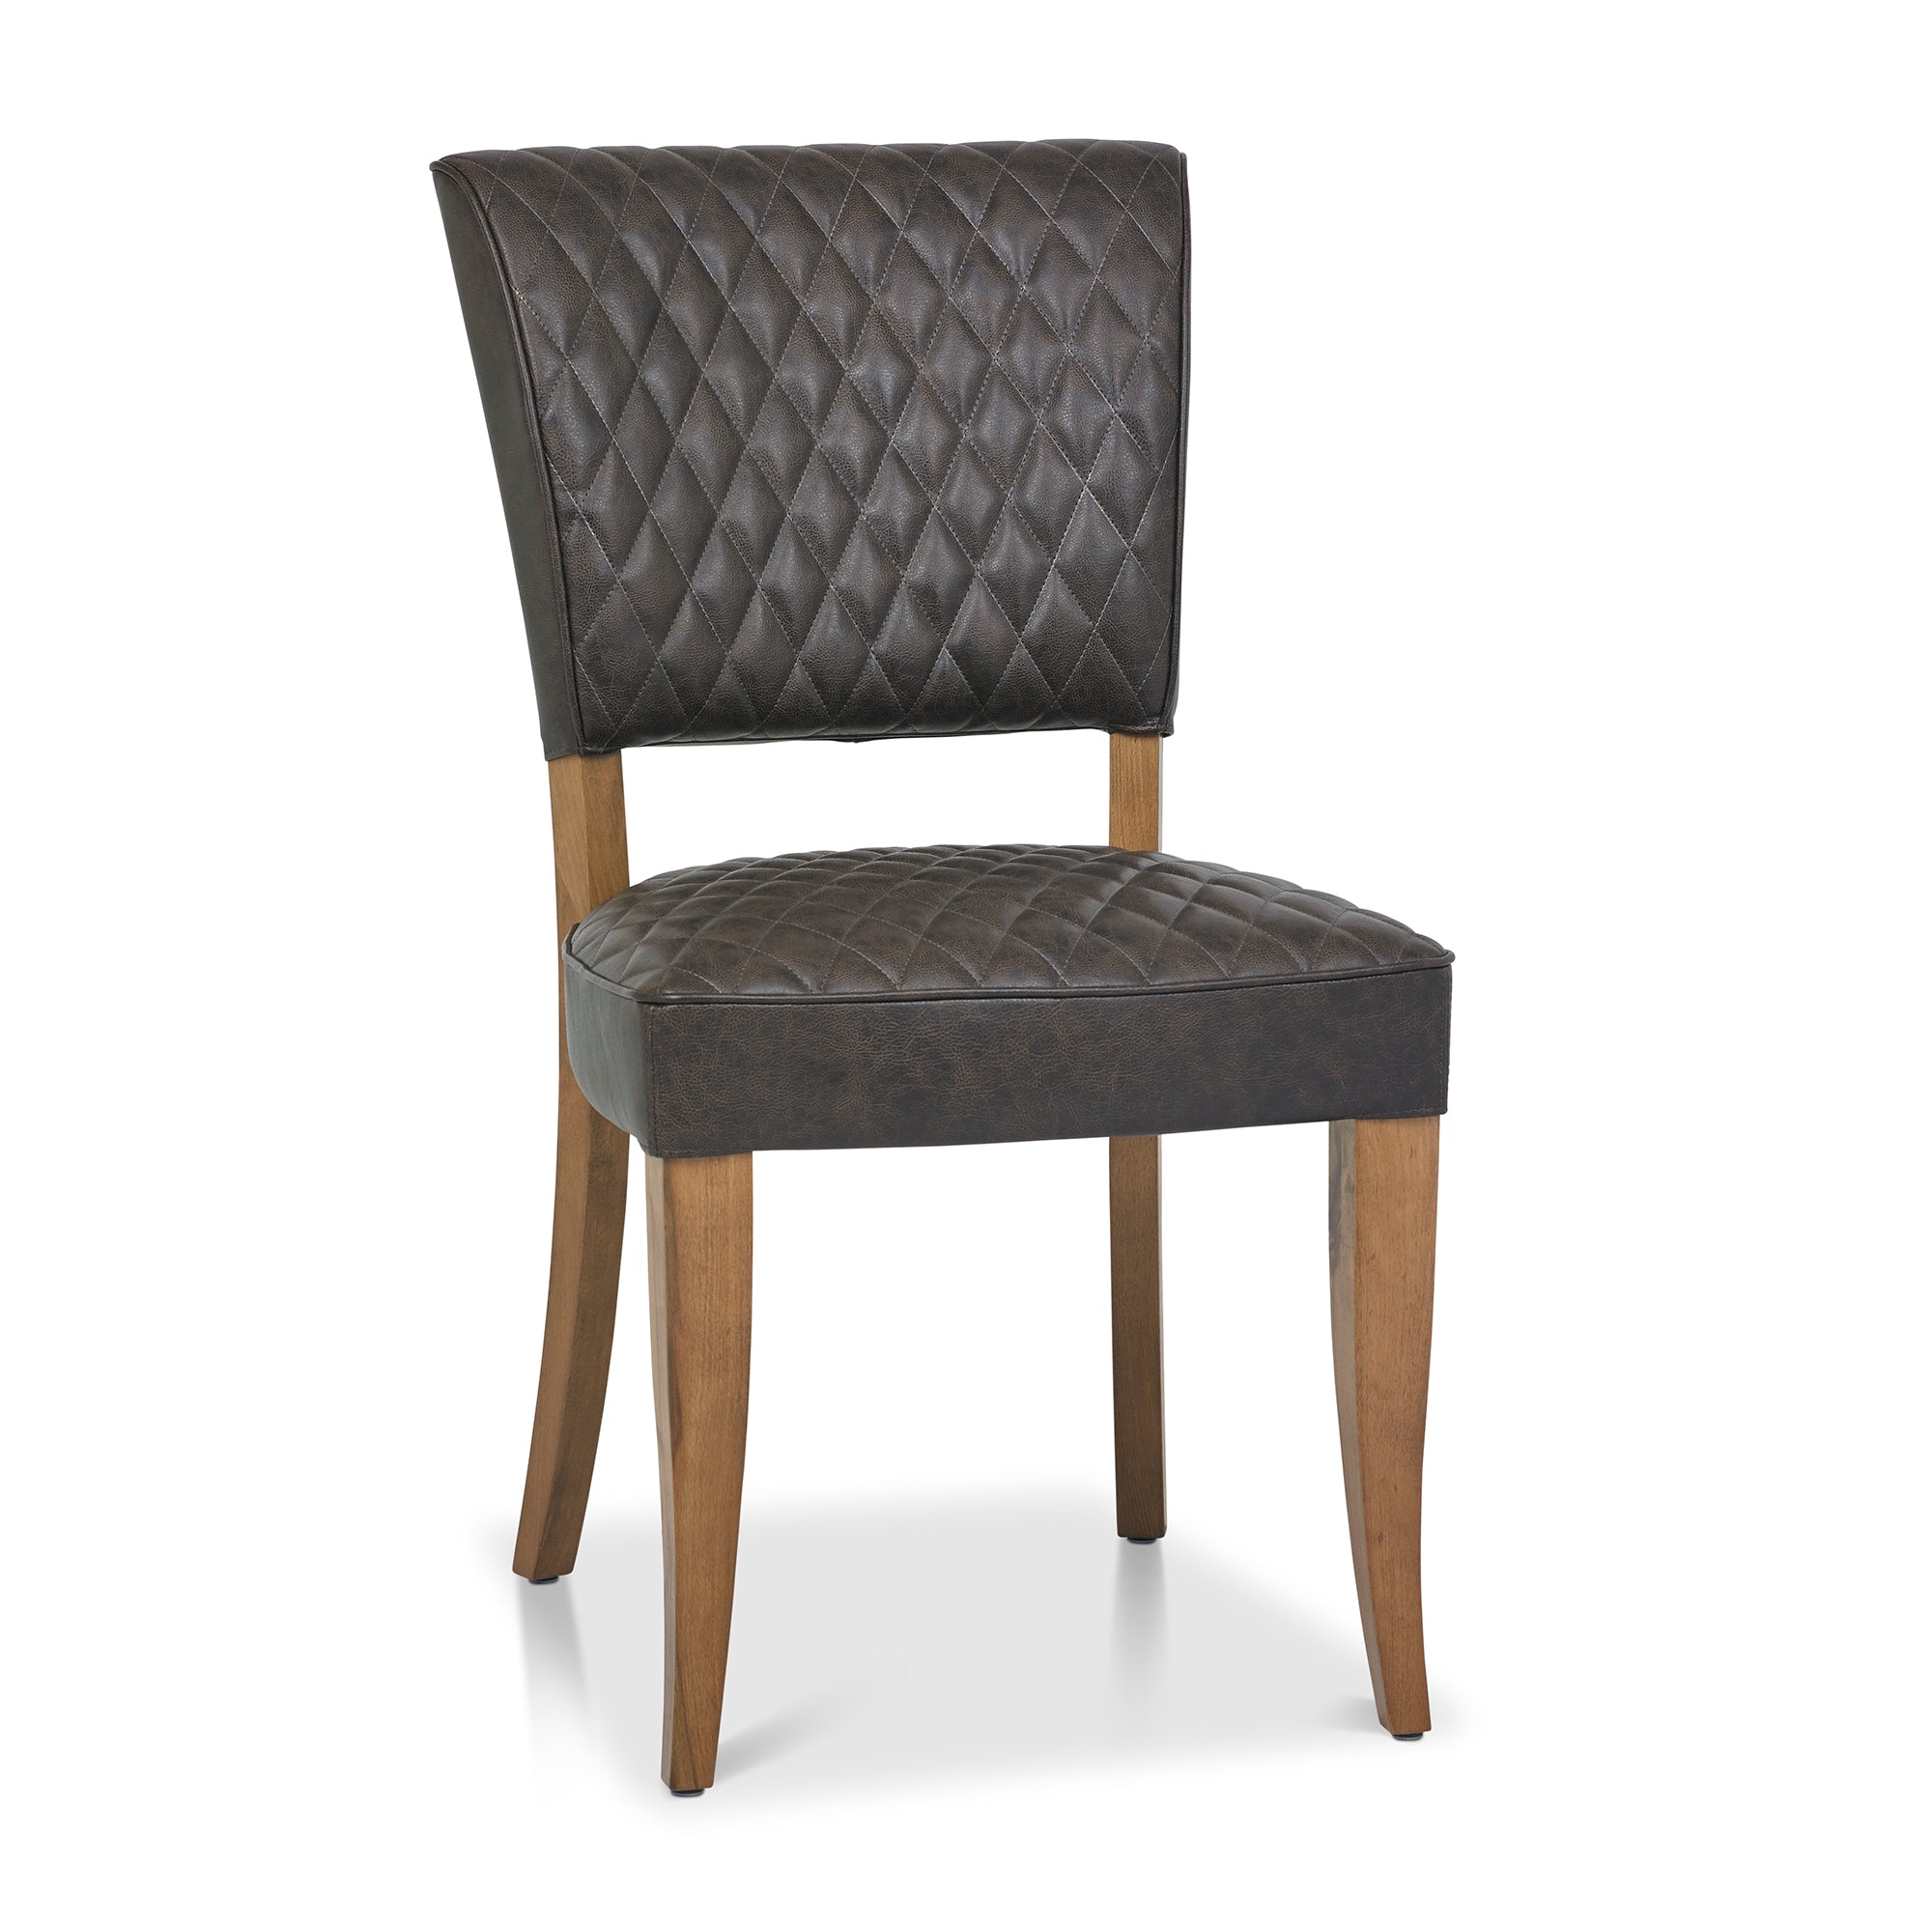 Landon Rustic Oak Dining Chairs Saddle Faux Leather